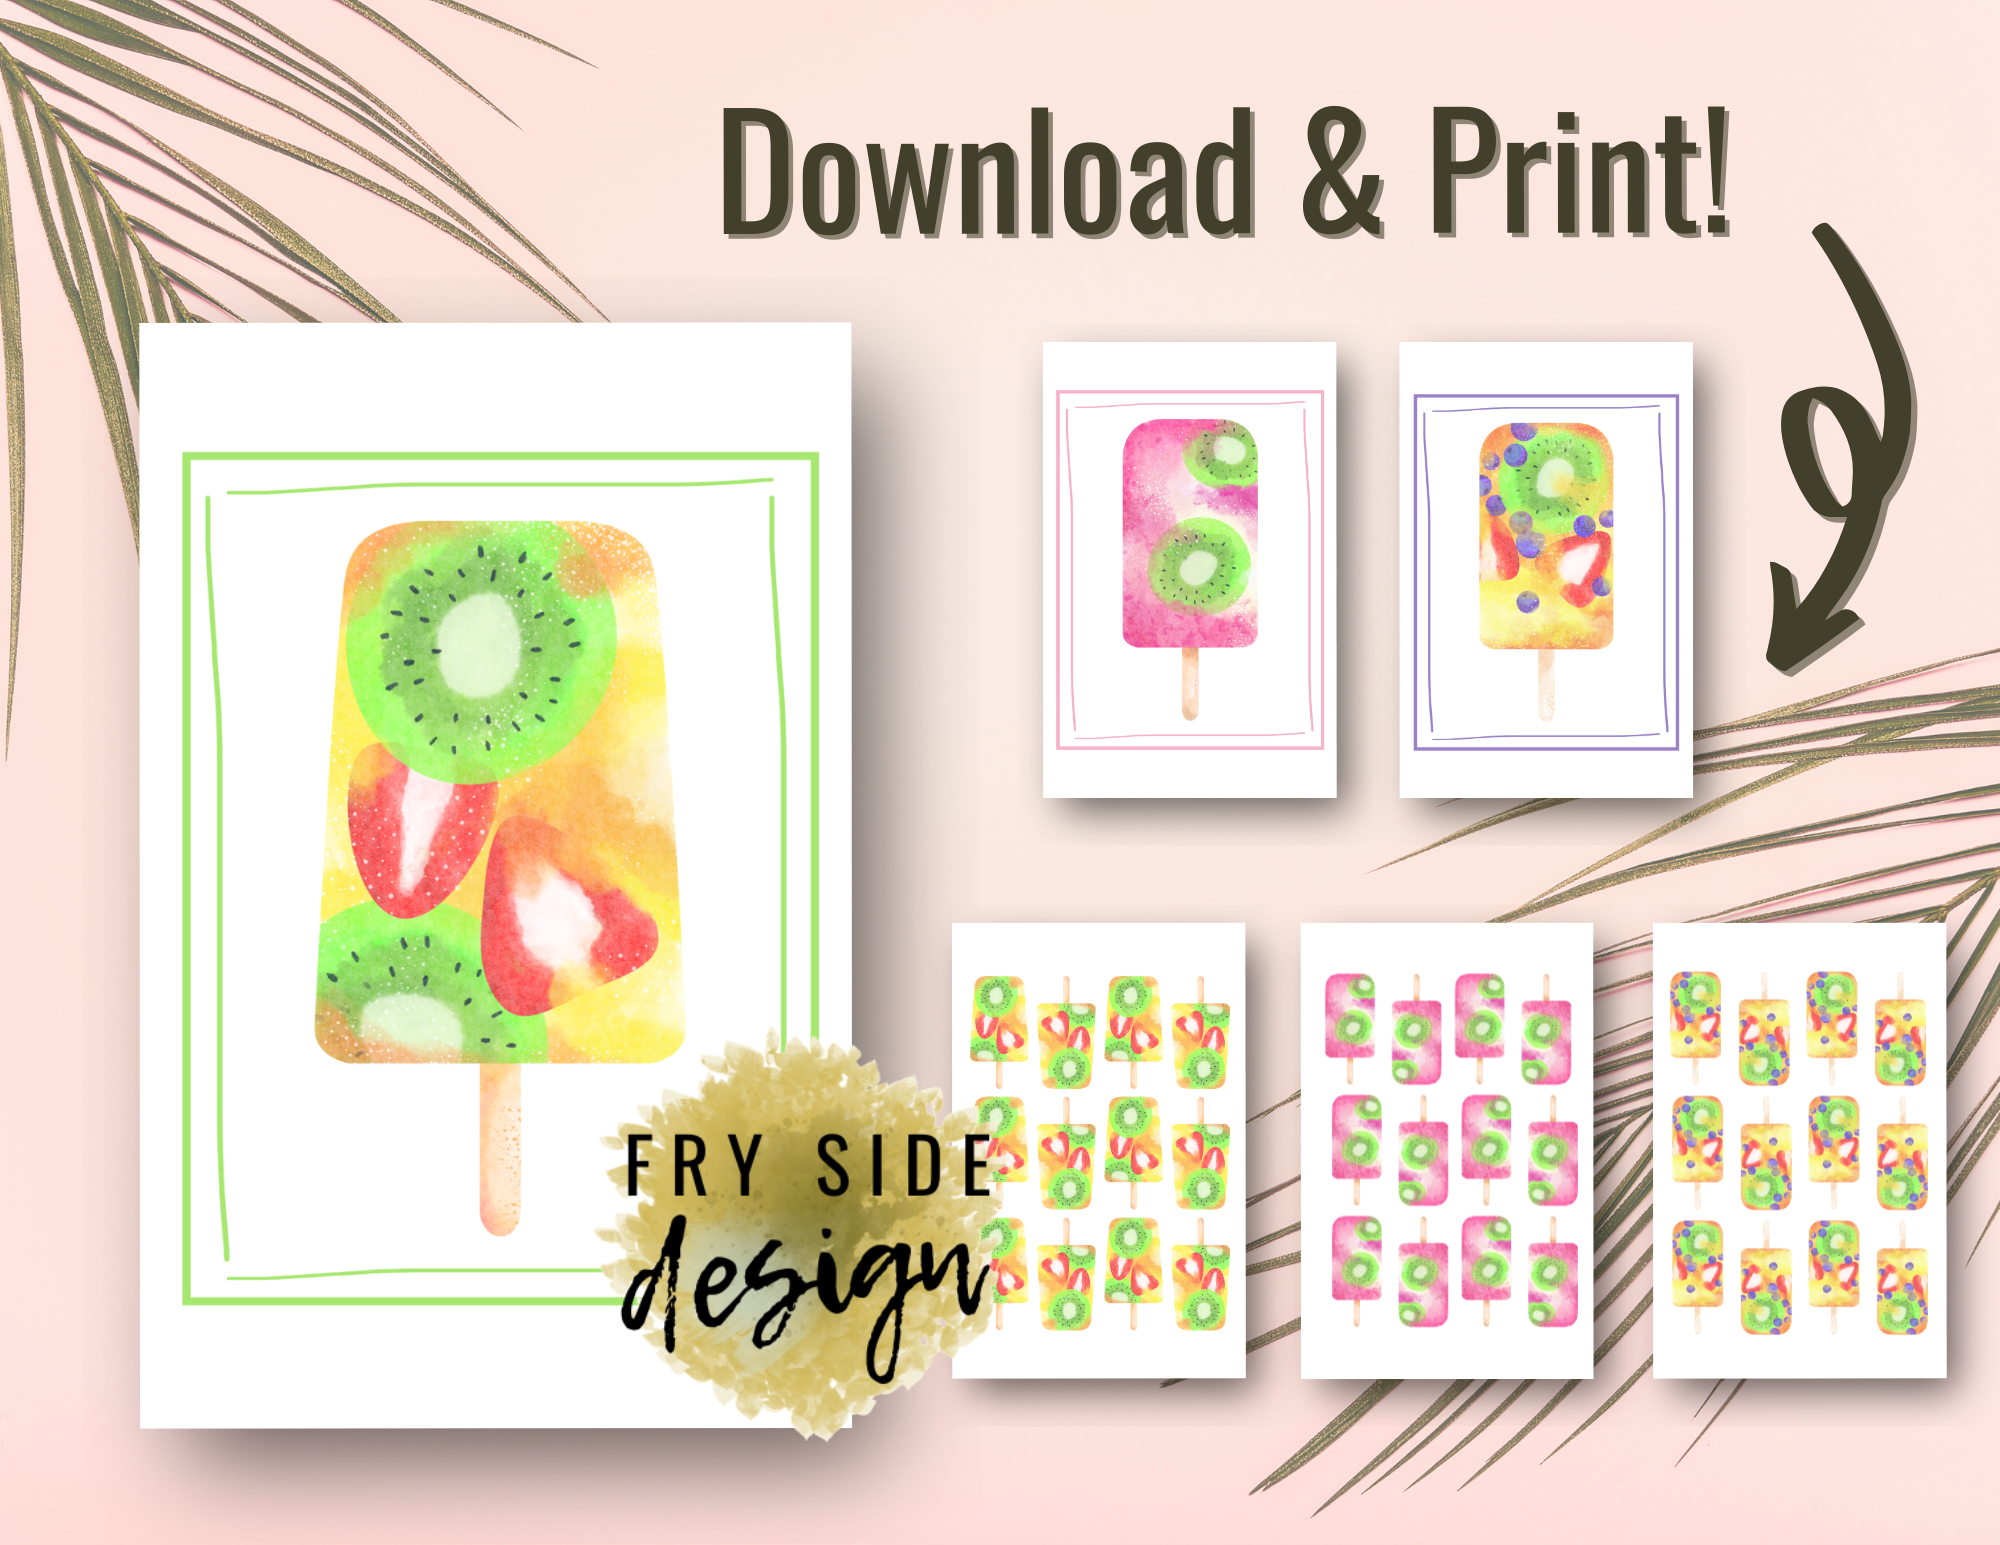 Blank Note Cards, Printable Note Cards